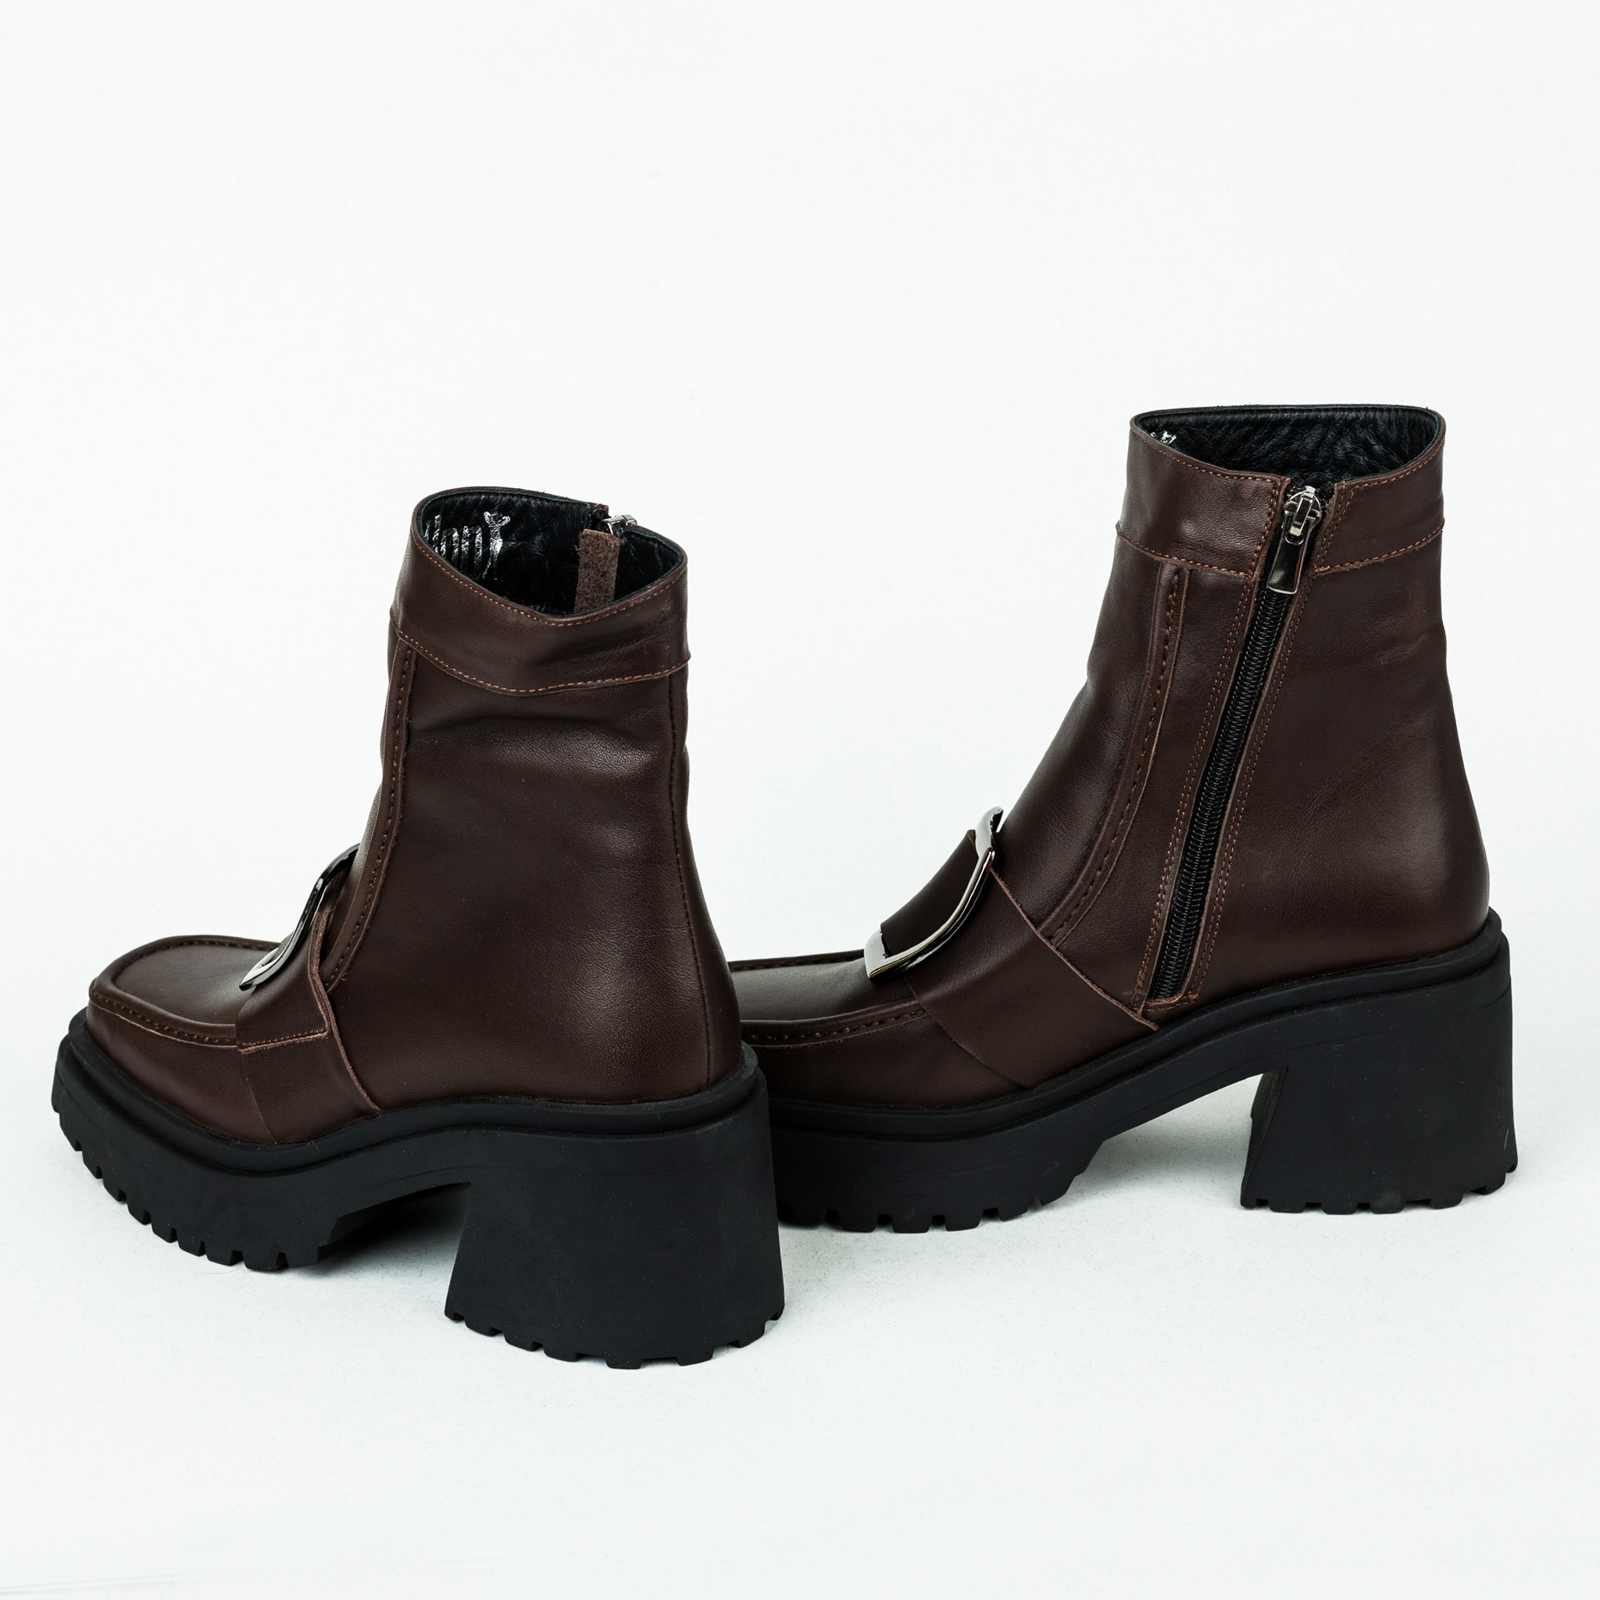 Leather ankle boots B084 - BROWN